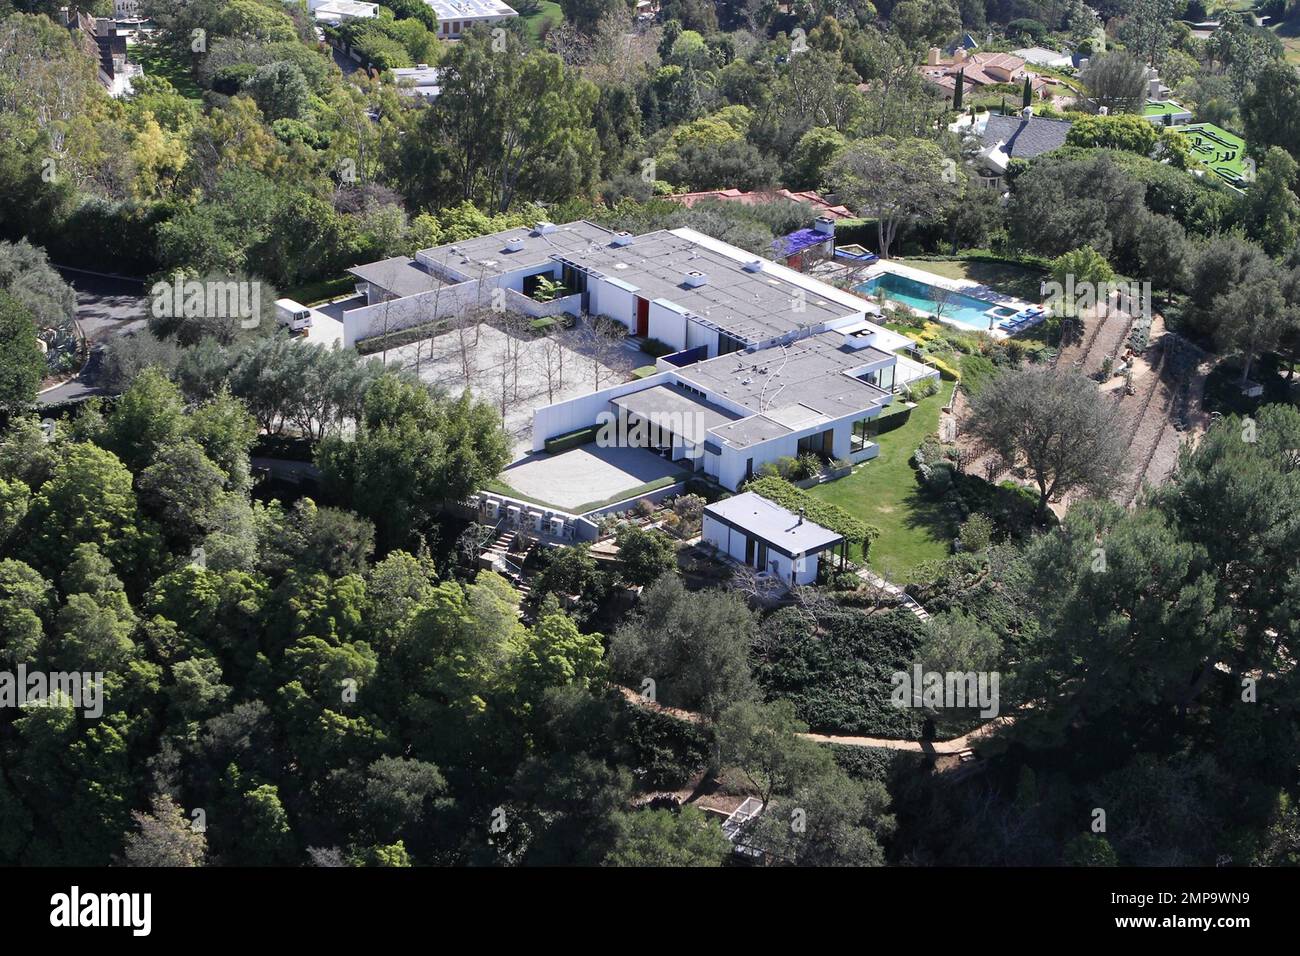 EXCLUSIVE!! Actress Jennifer Aniston is reportedly purchasing this stunning  $22 million love-nest in Bel Air. The 8,500 square foot property is perched  on an estimated 3.25 acre lot high above the exclusive